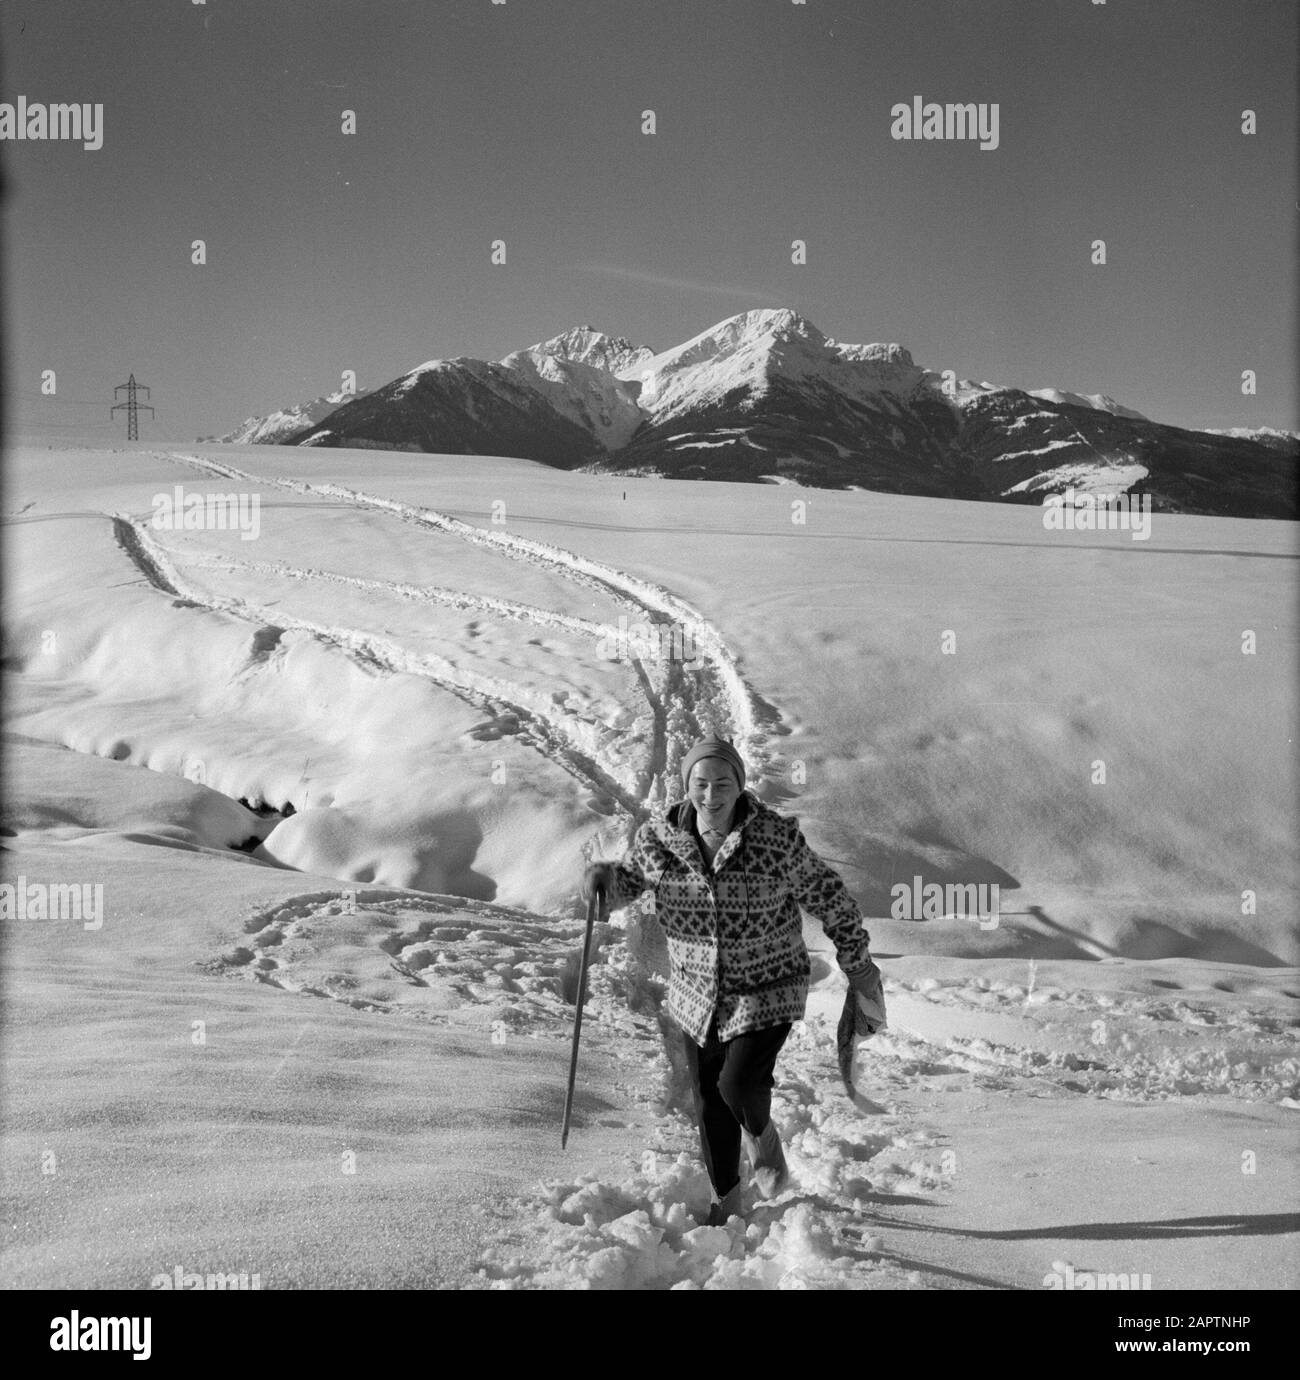 Winter in Tyrol  Hilde Eschen walks in the snow with in the background the Karwendel Mountains Date: January 1960 Location: Austria, Sistrans, Tyrol Keywords: mountains, landscapes, snow, holiday, hiking, winter Personal name: Echen, Hilde Stock Photo